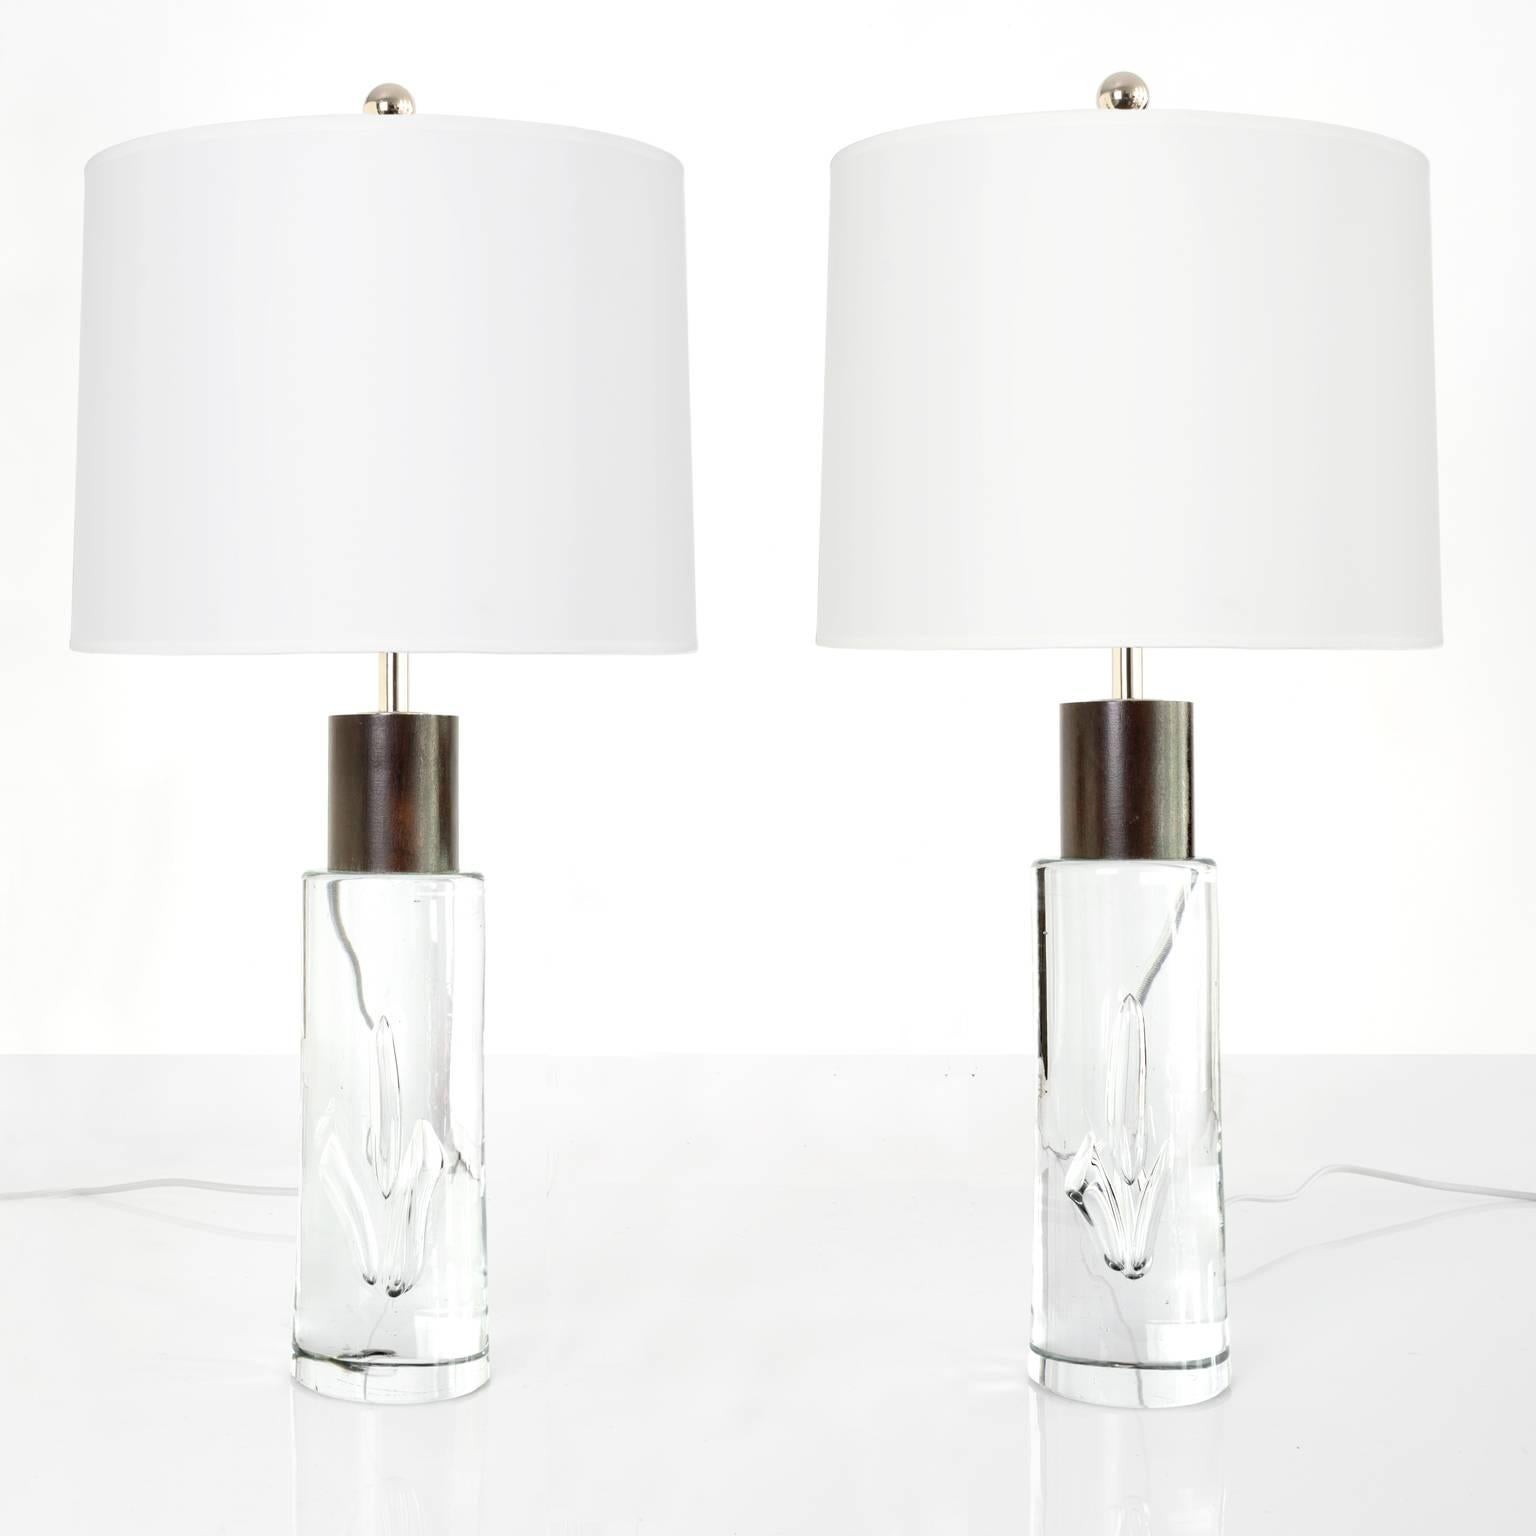 Pair of Vicke Lindstrand designed solid glass table lamps with mahogany details. The cylindrical forms have large air bubbles added to great effect and are topped off with carved pieces of mahogany. Newly rewired for the USA with nickel plated stems